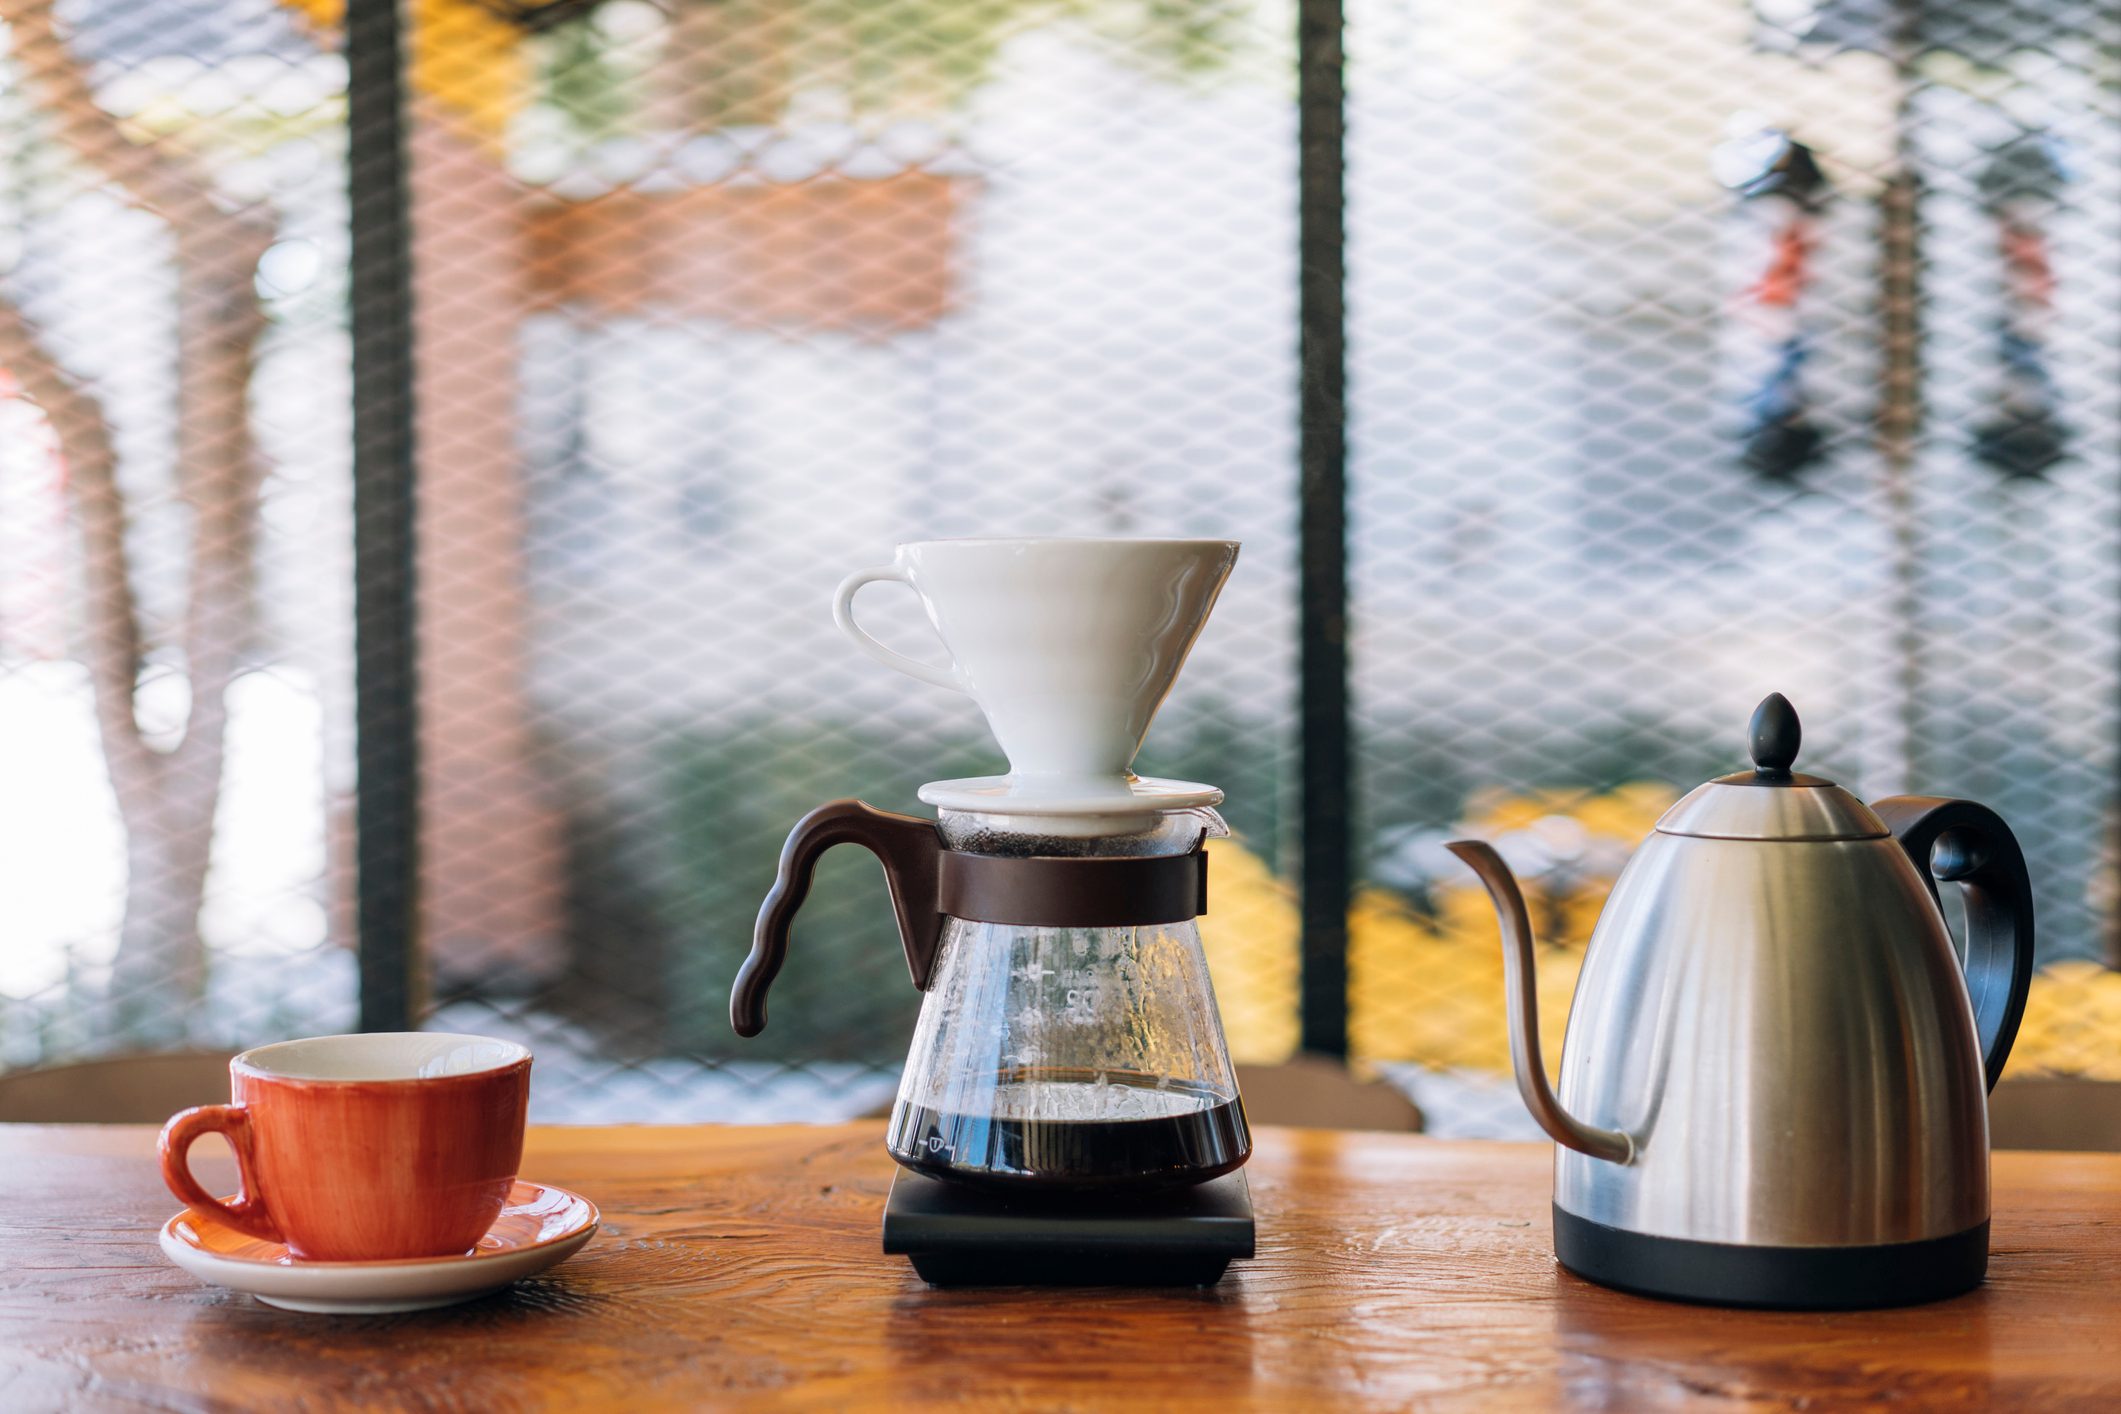 Everything You Need to Make Pour-Over Coffee